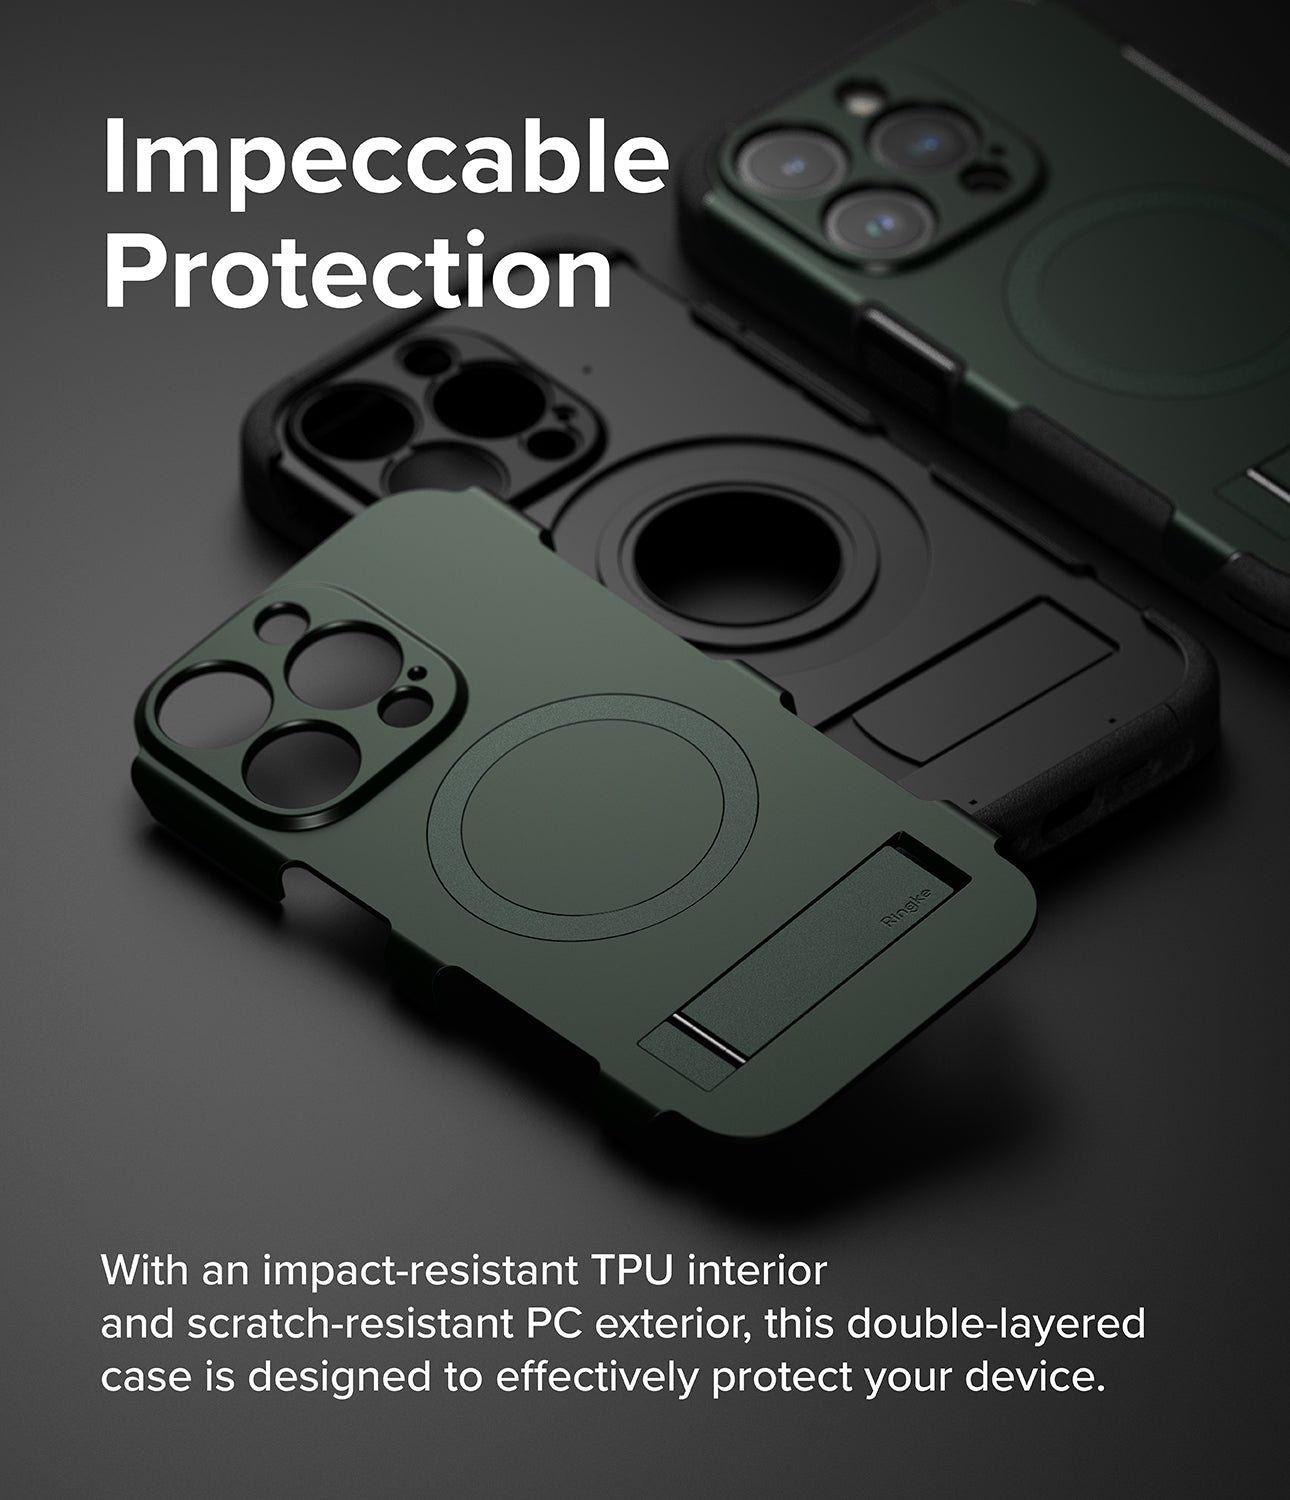 iPhone 15 Pro Max Case | Alles - Dark Green - Impeccable Protection. With an impact-resistant TPU interior and scratch-resistant PC exterior, this double-layered case is designed to effectively protect your device.